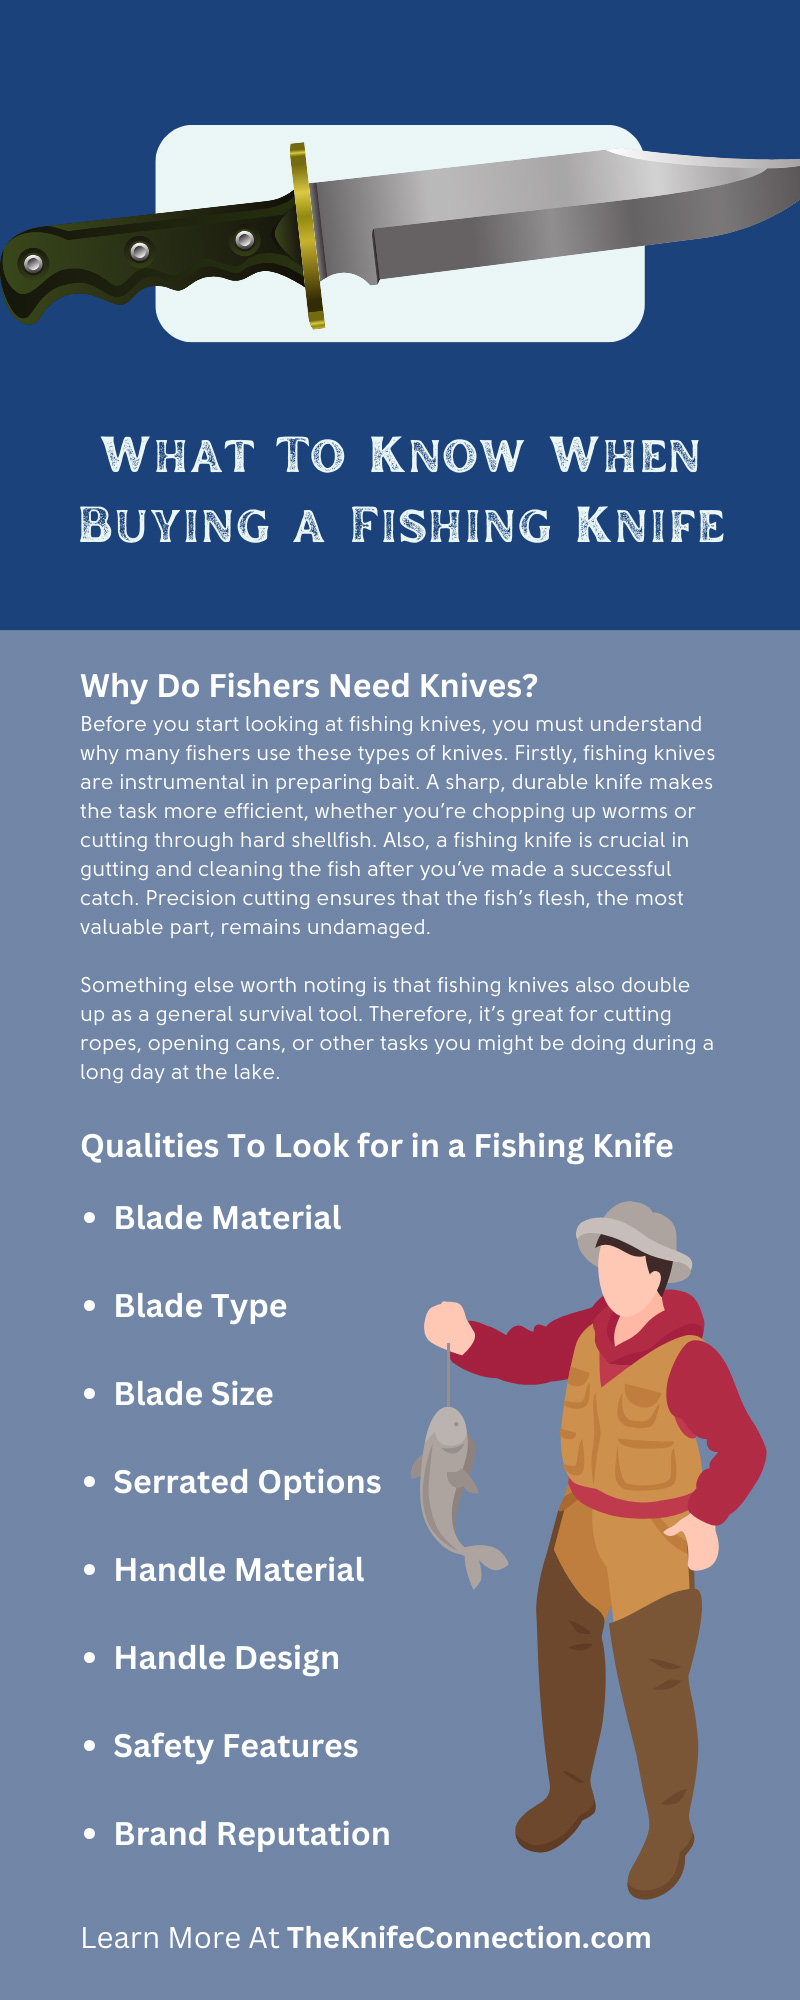 What To Know When Buying a Fishing Knife